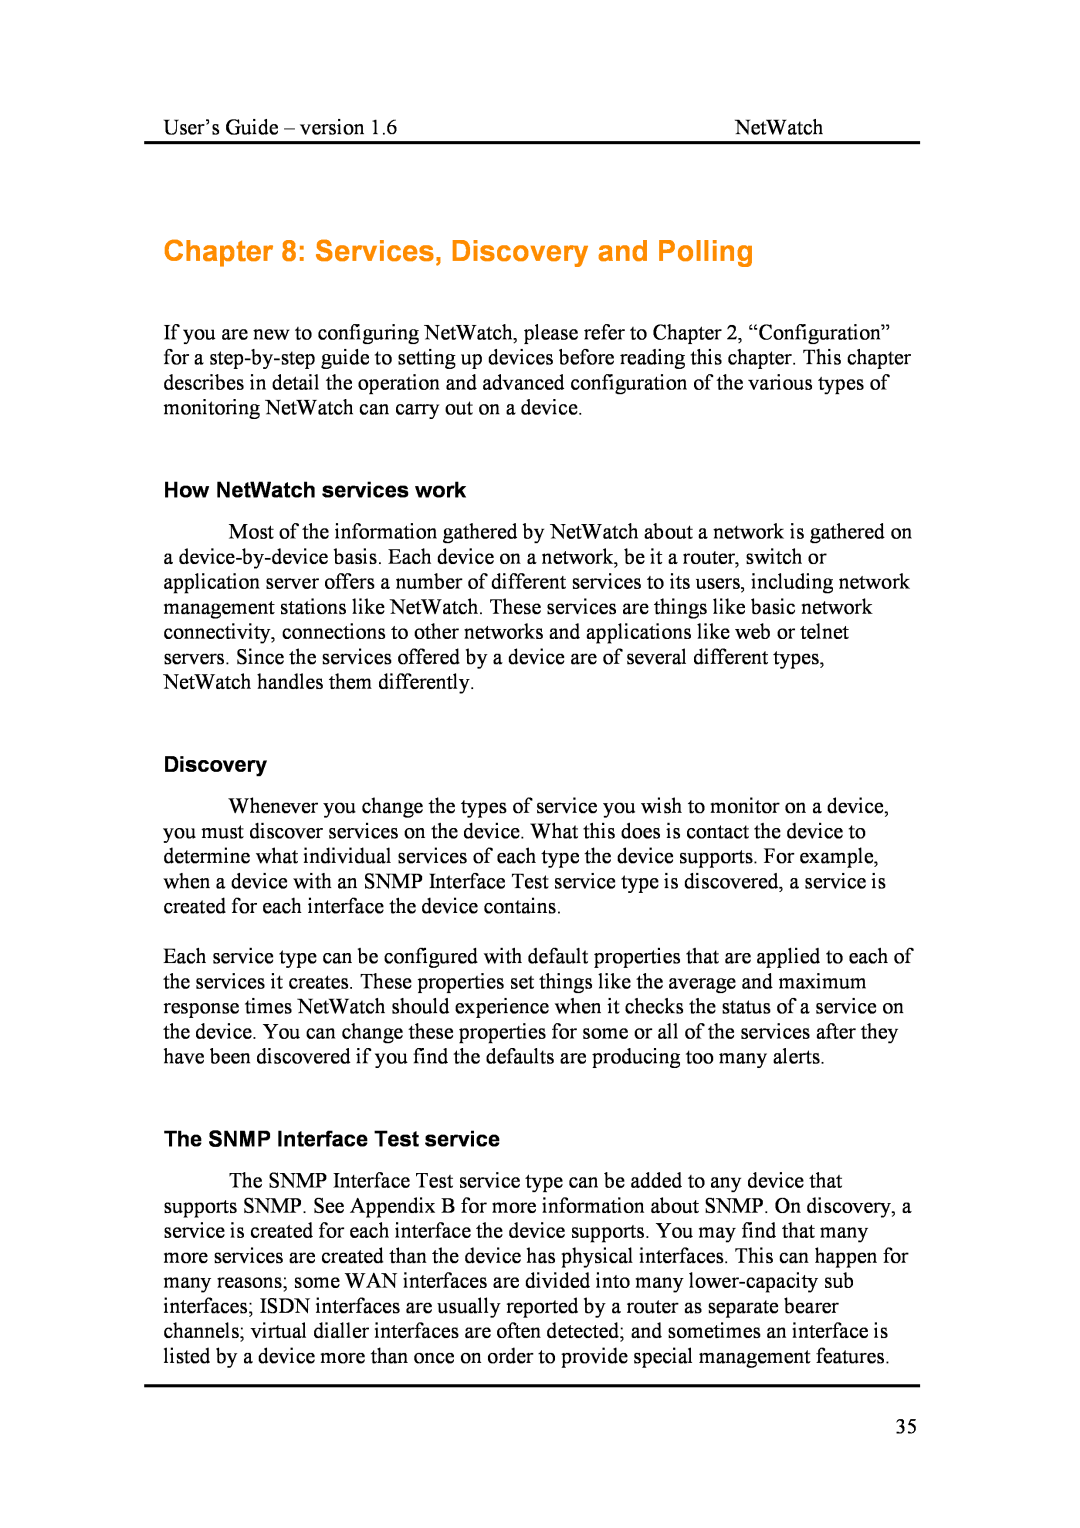 Fluke Network Router manual Services, Discovery and Polling, How NetWatch services work, The SNMP Interface Test service 